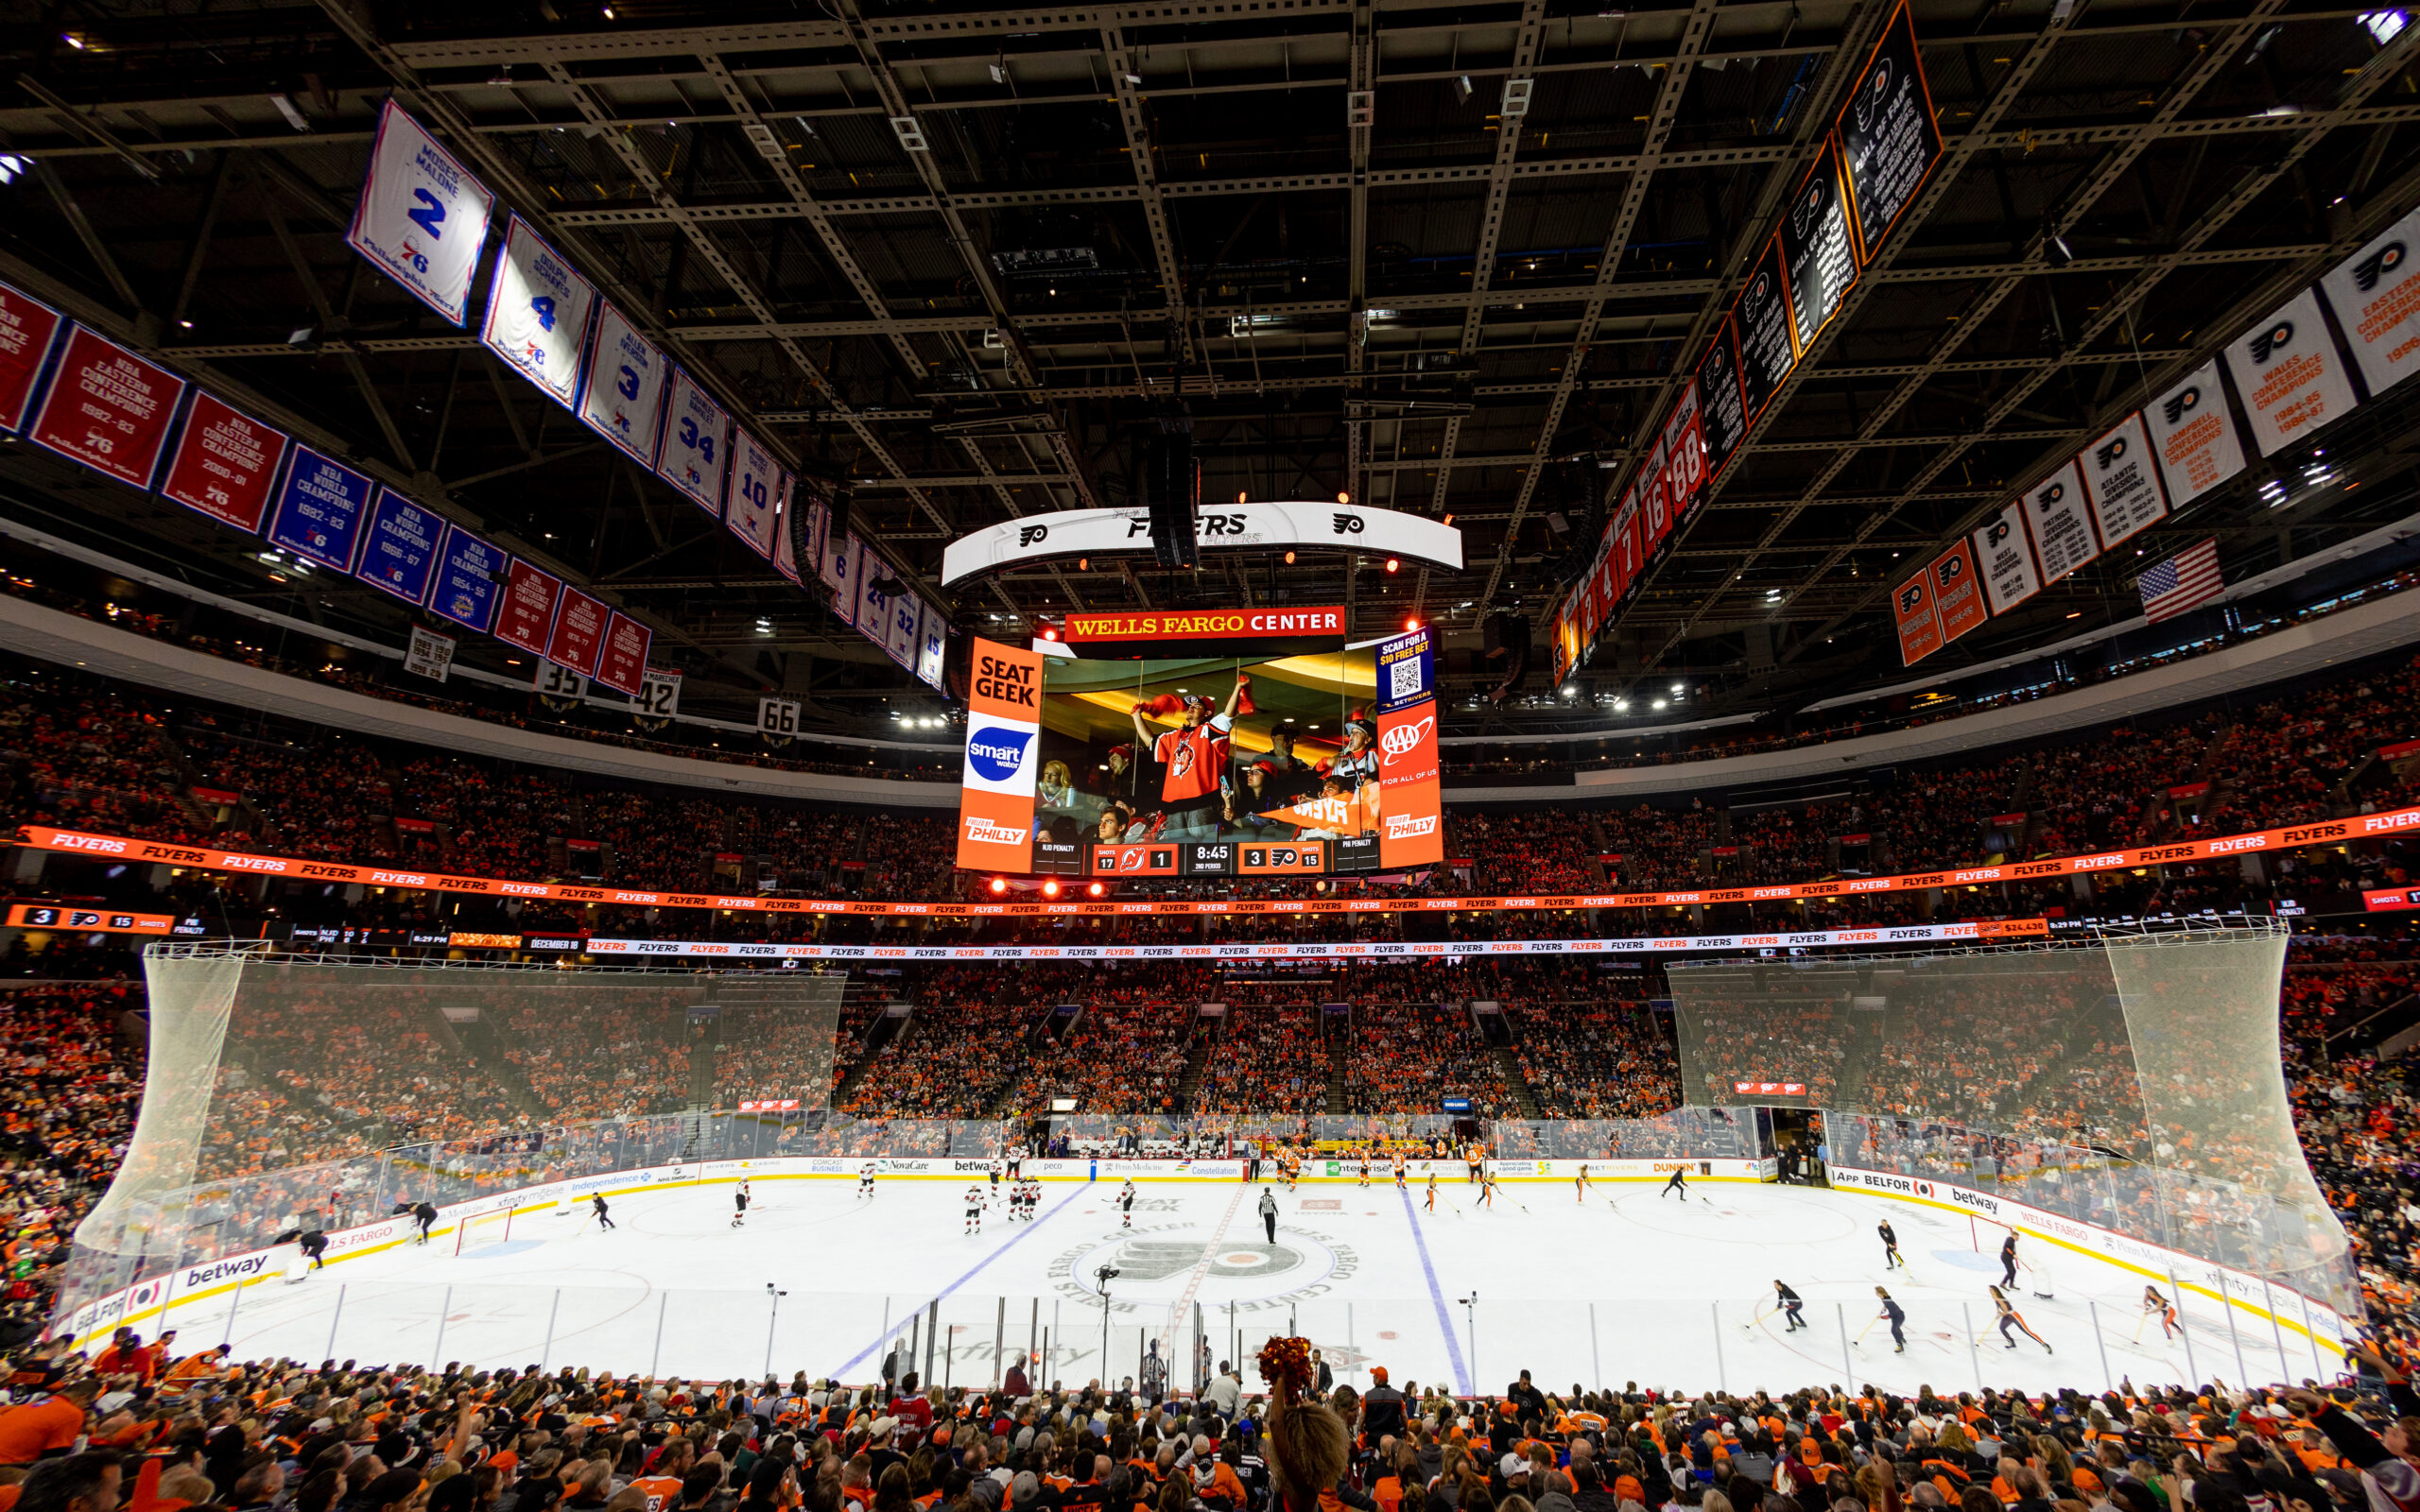 Wells Fargo Center reserved all lots for Flyers game tomorrow and